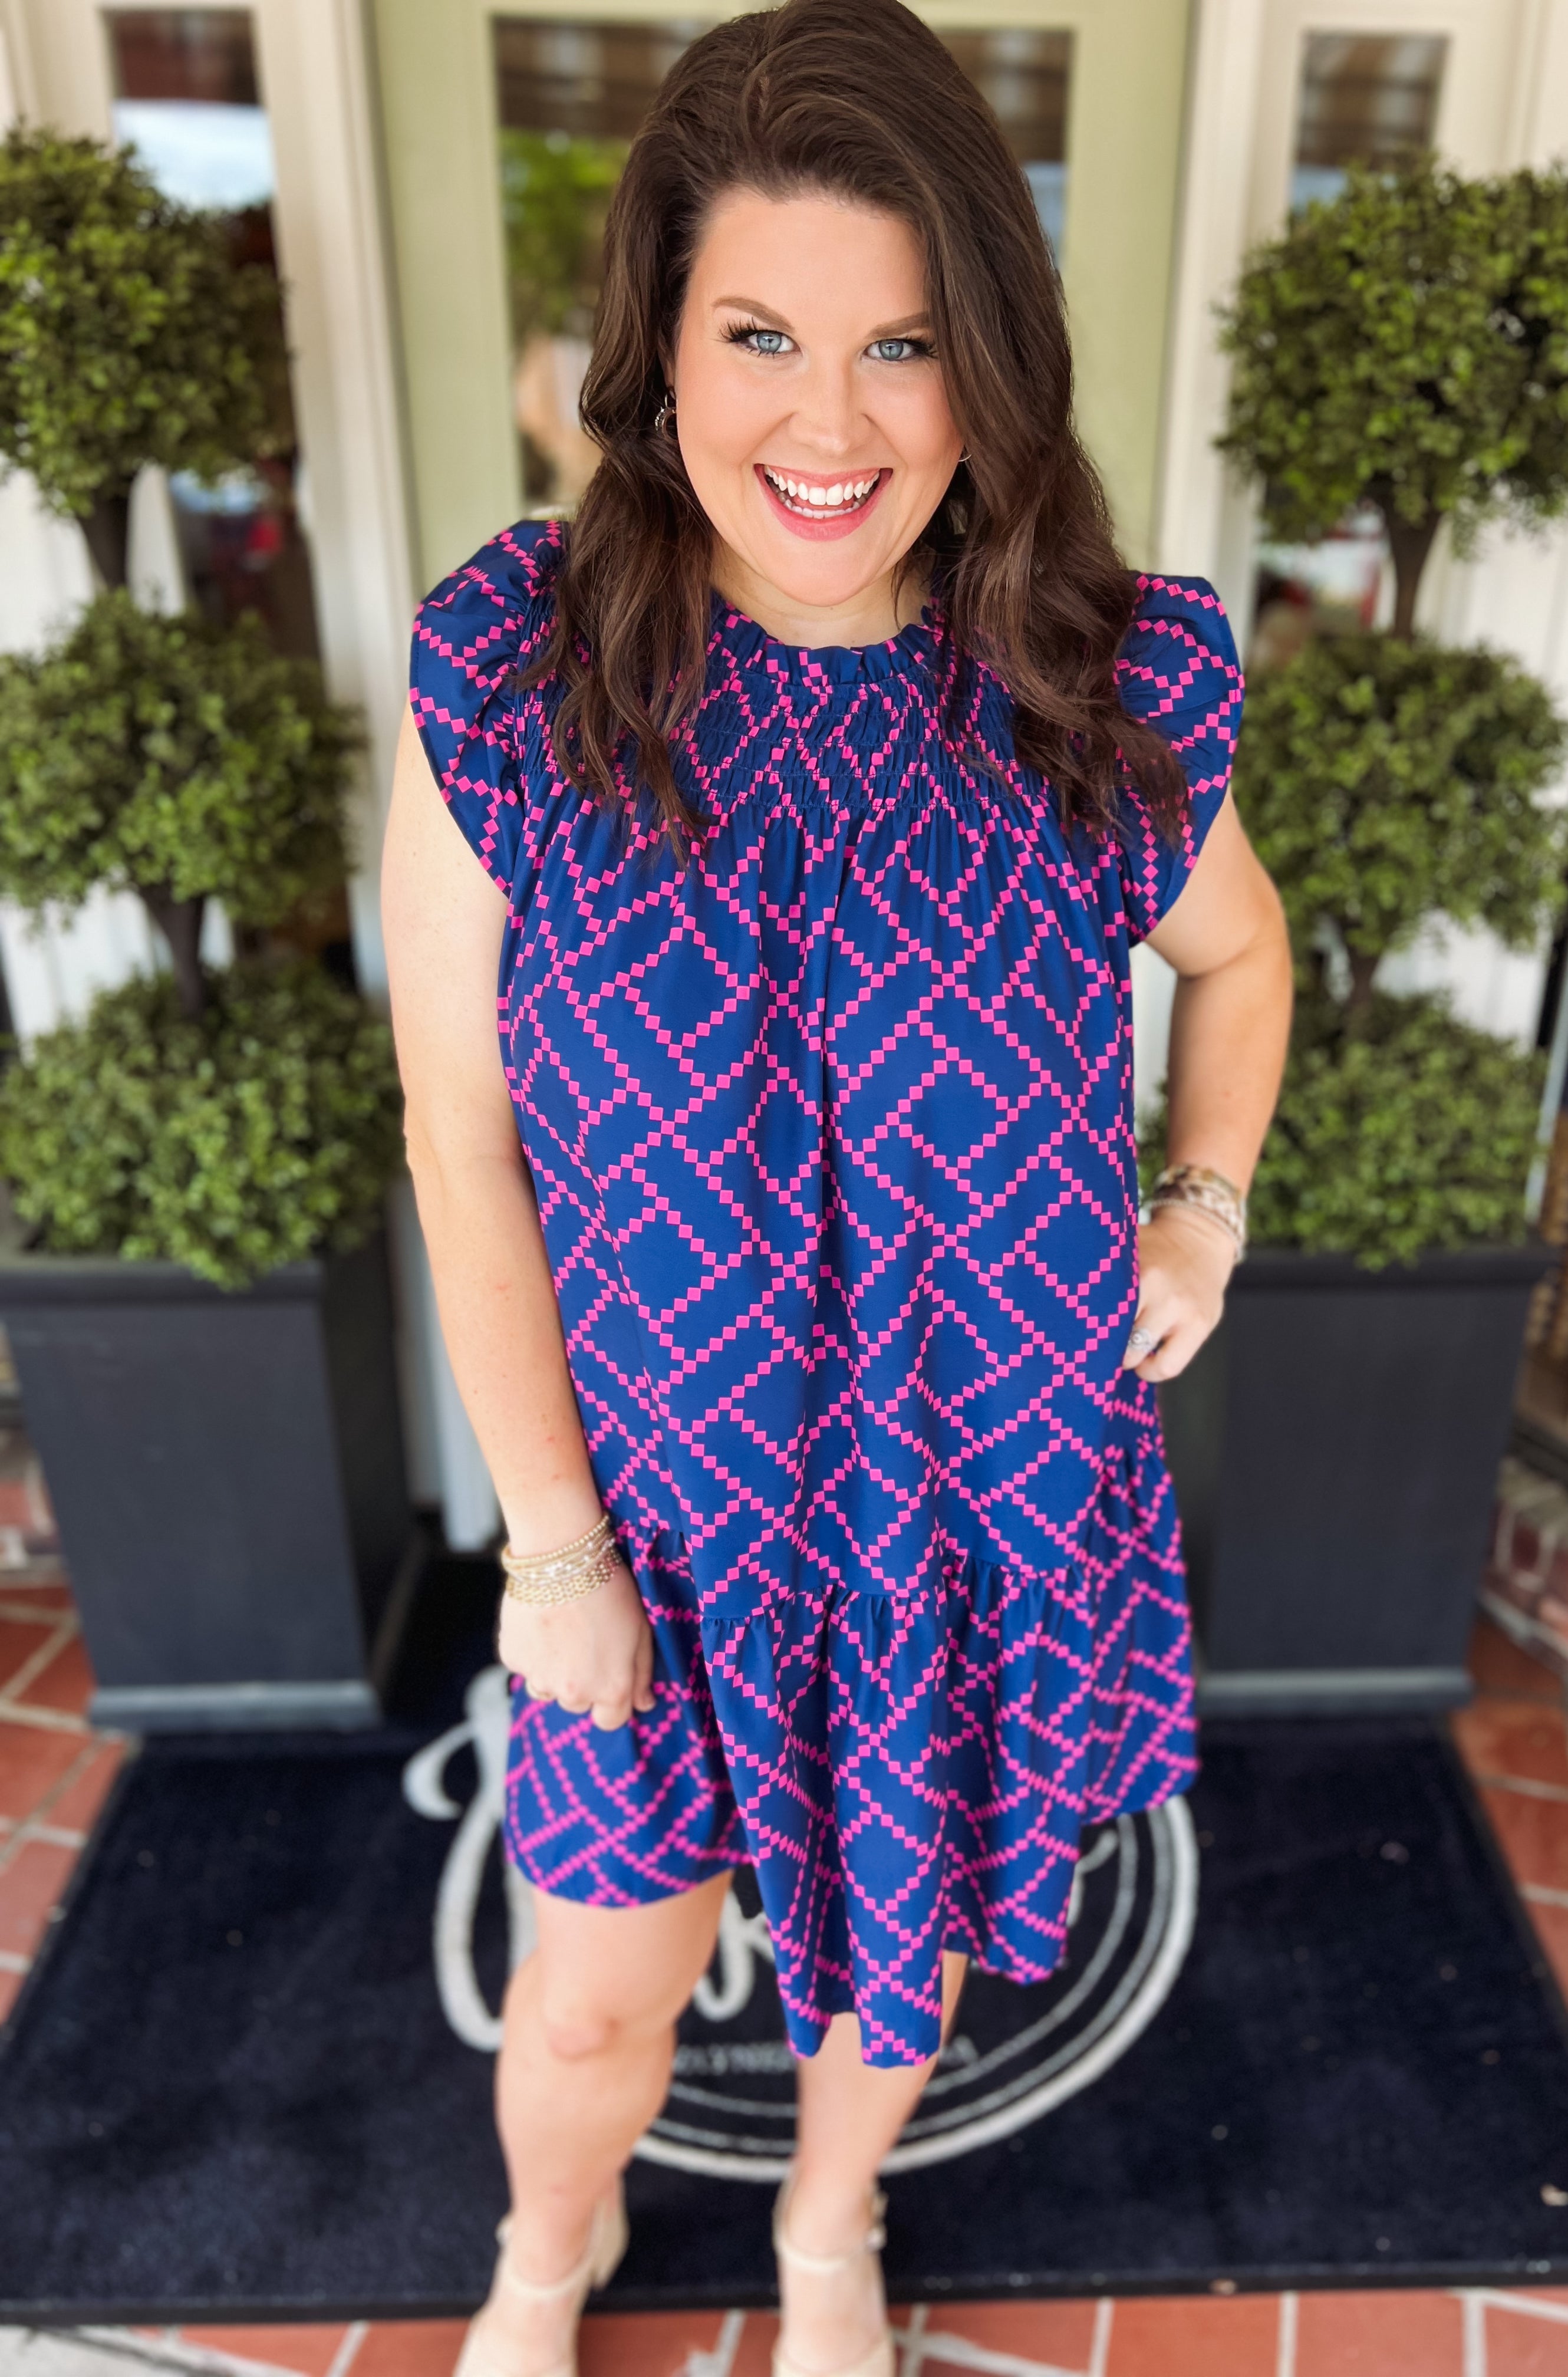 The Lola Dress in Navy and Pink